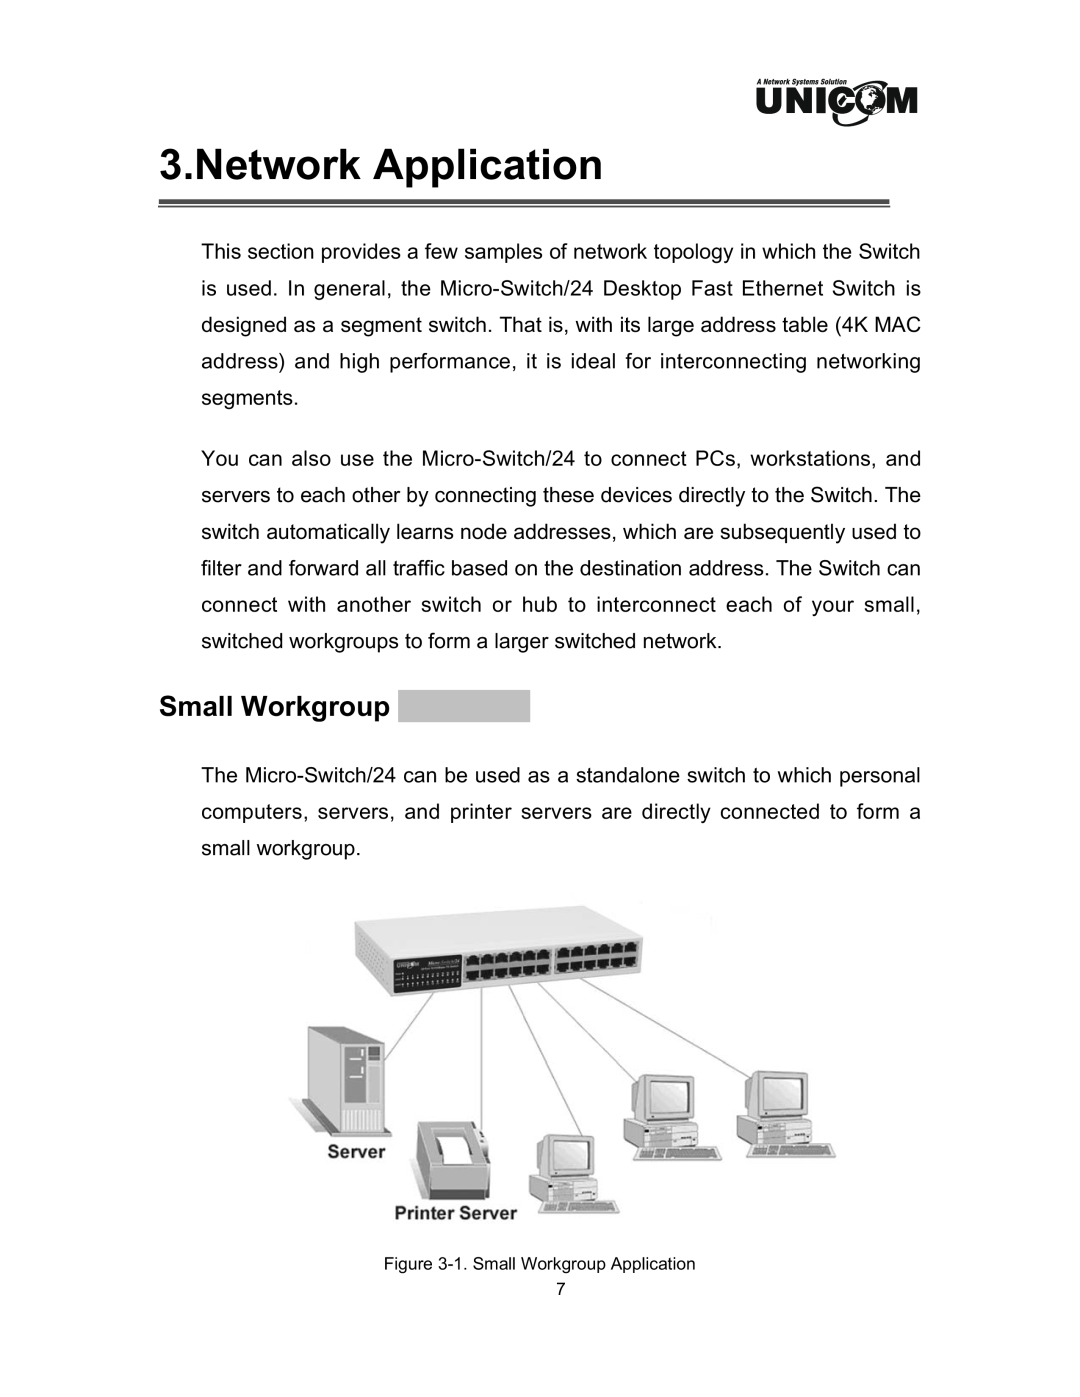 UNICOM Electric FEP-32024T specifications Network Application, Small Workgroup 